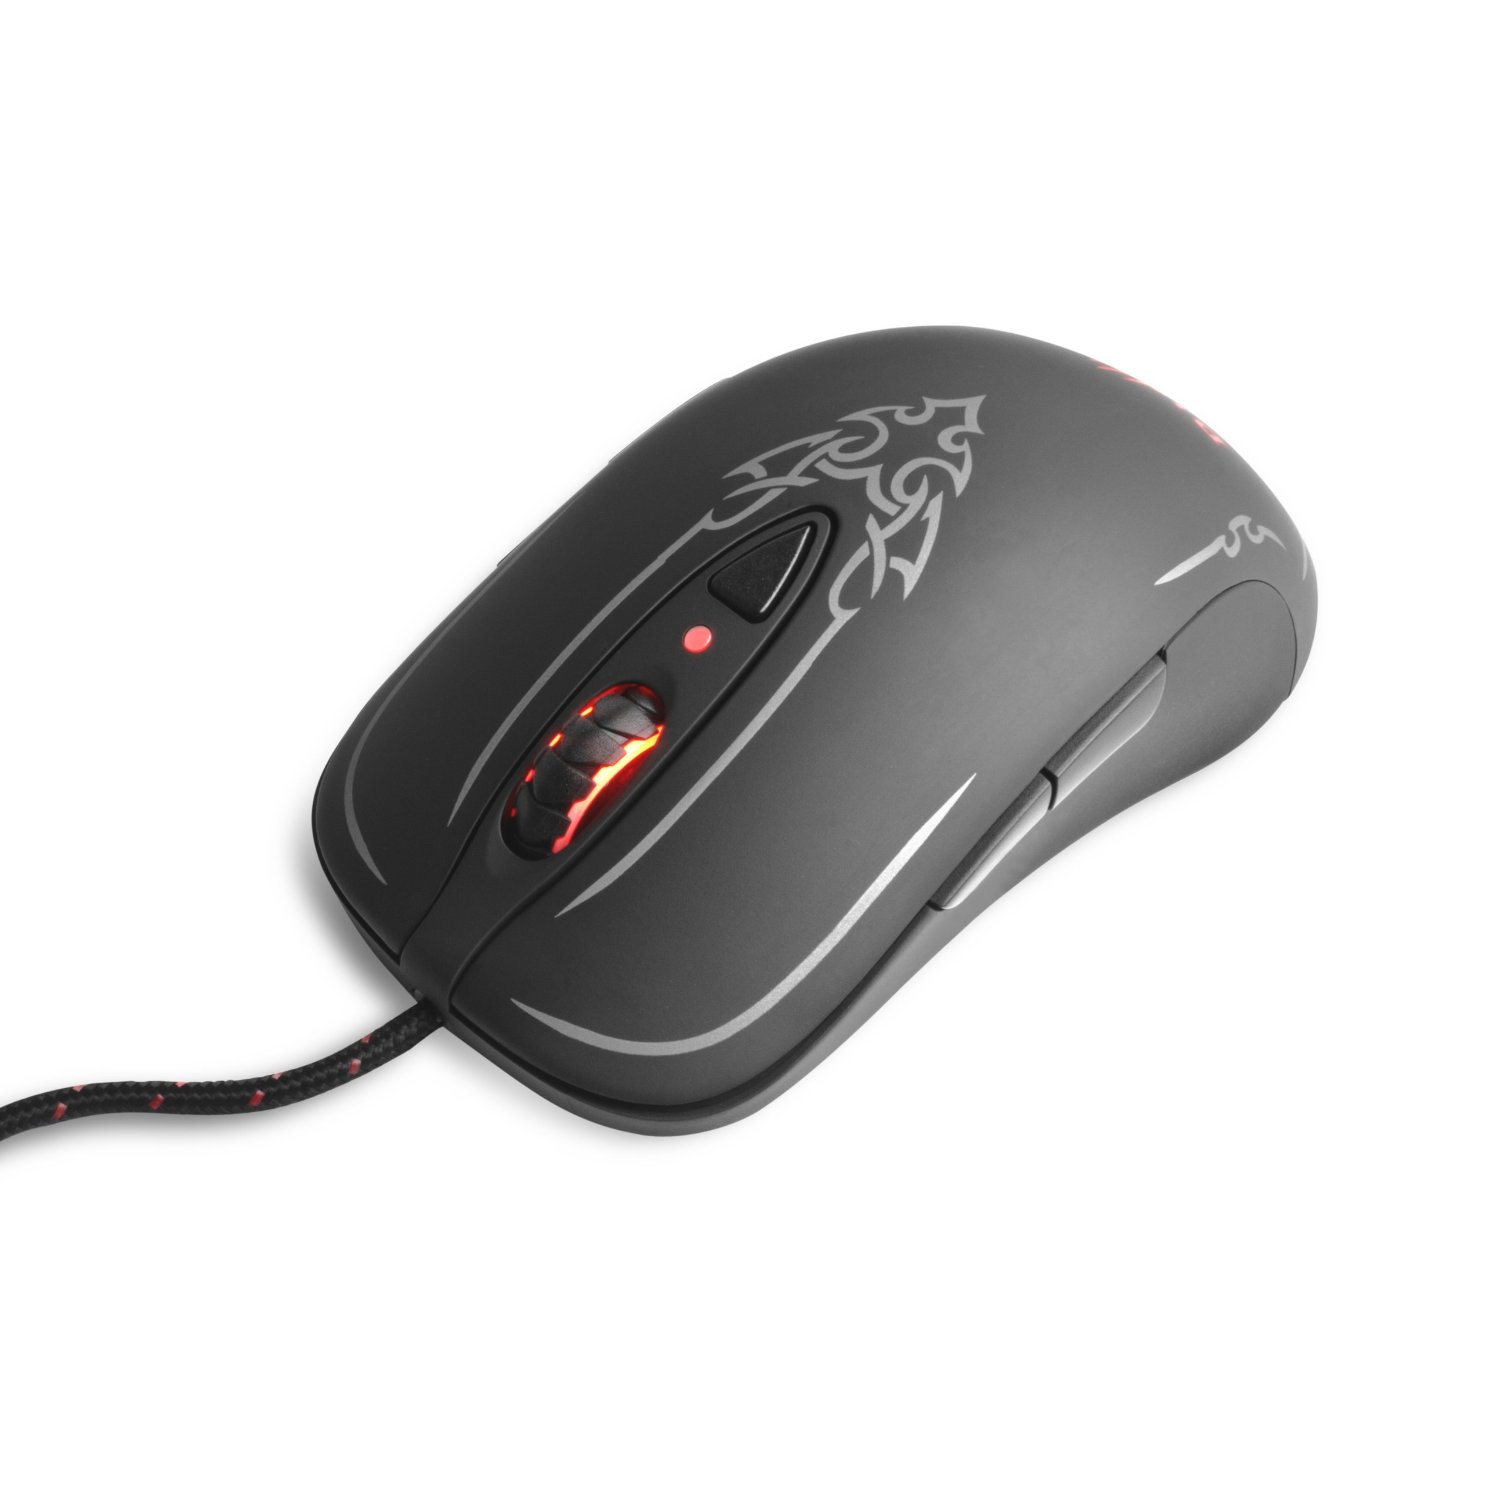 http://thetechjournal.com/wp-content/uploads/images/1202/1329590420-steelseries-diablo-iii-gaming-mouse-5.jpg